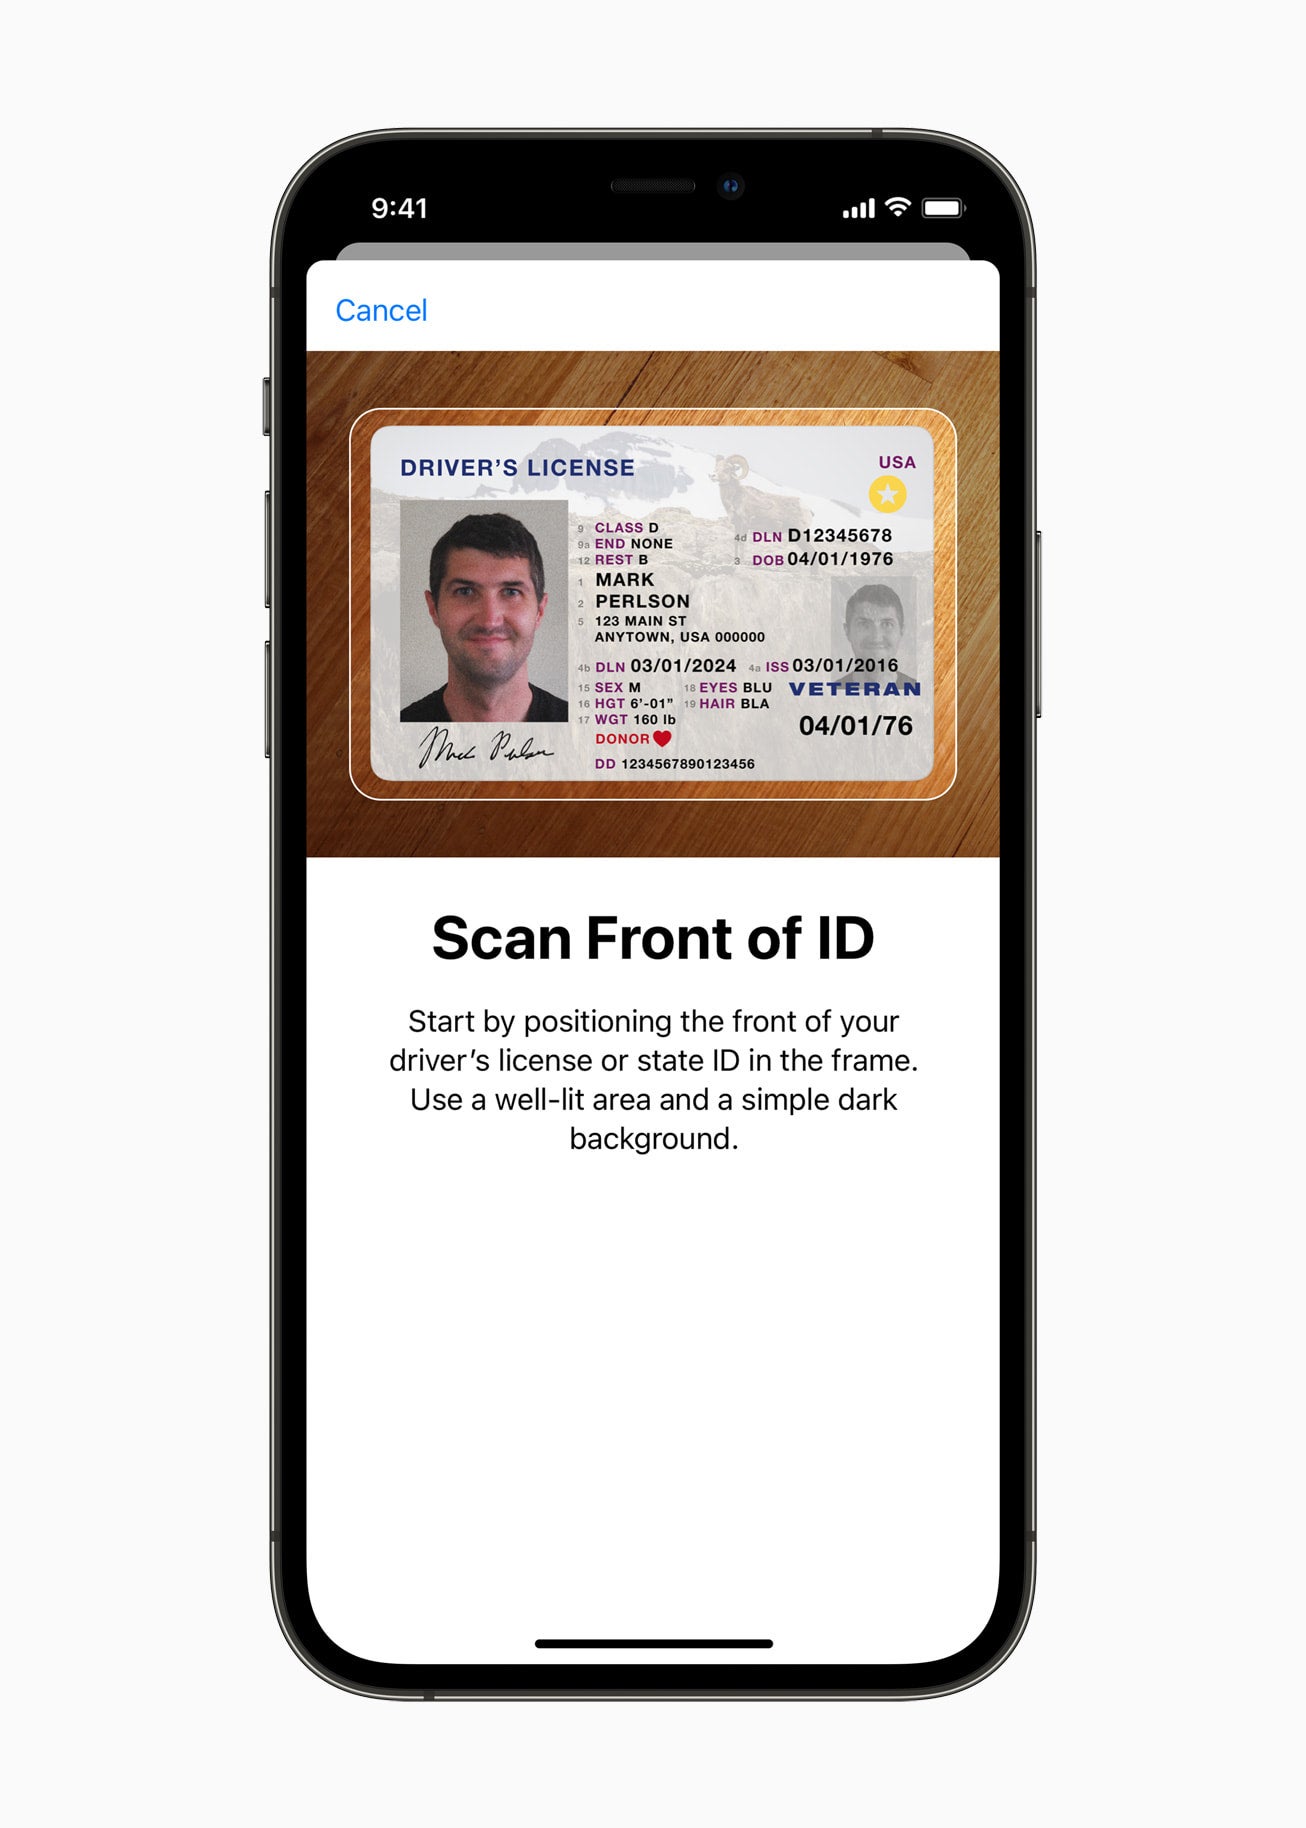 LA Wallet digital driver's license app not accepted everywhere